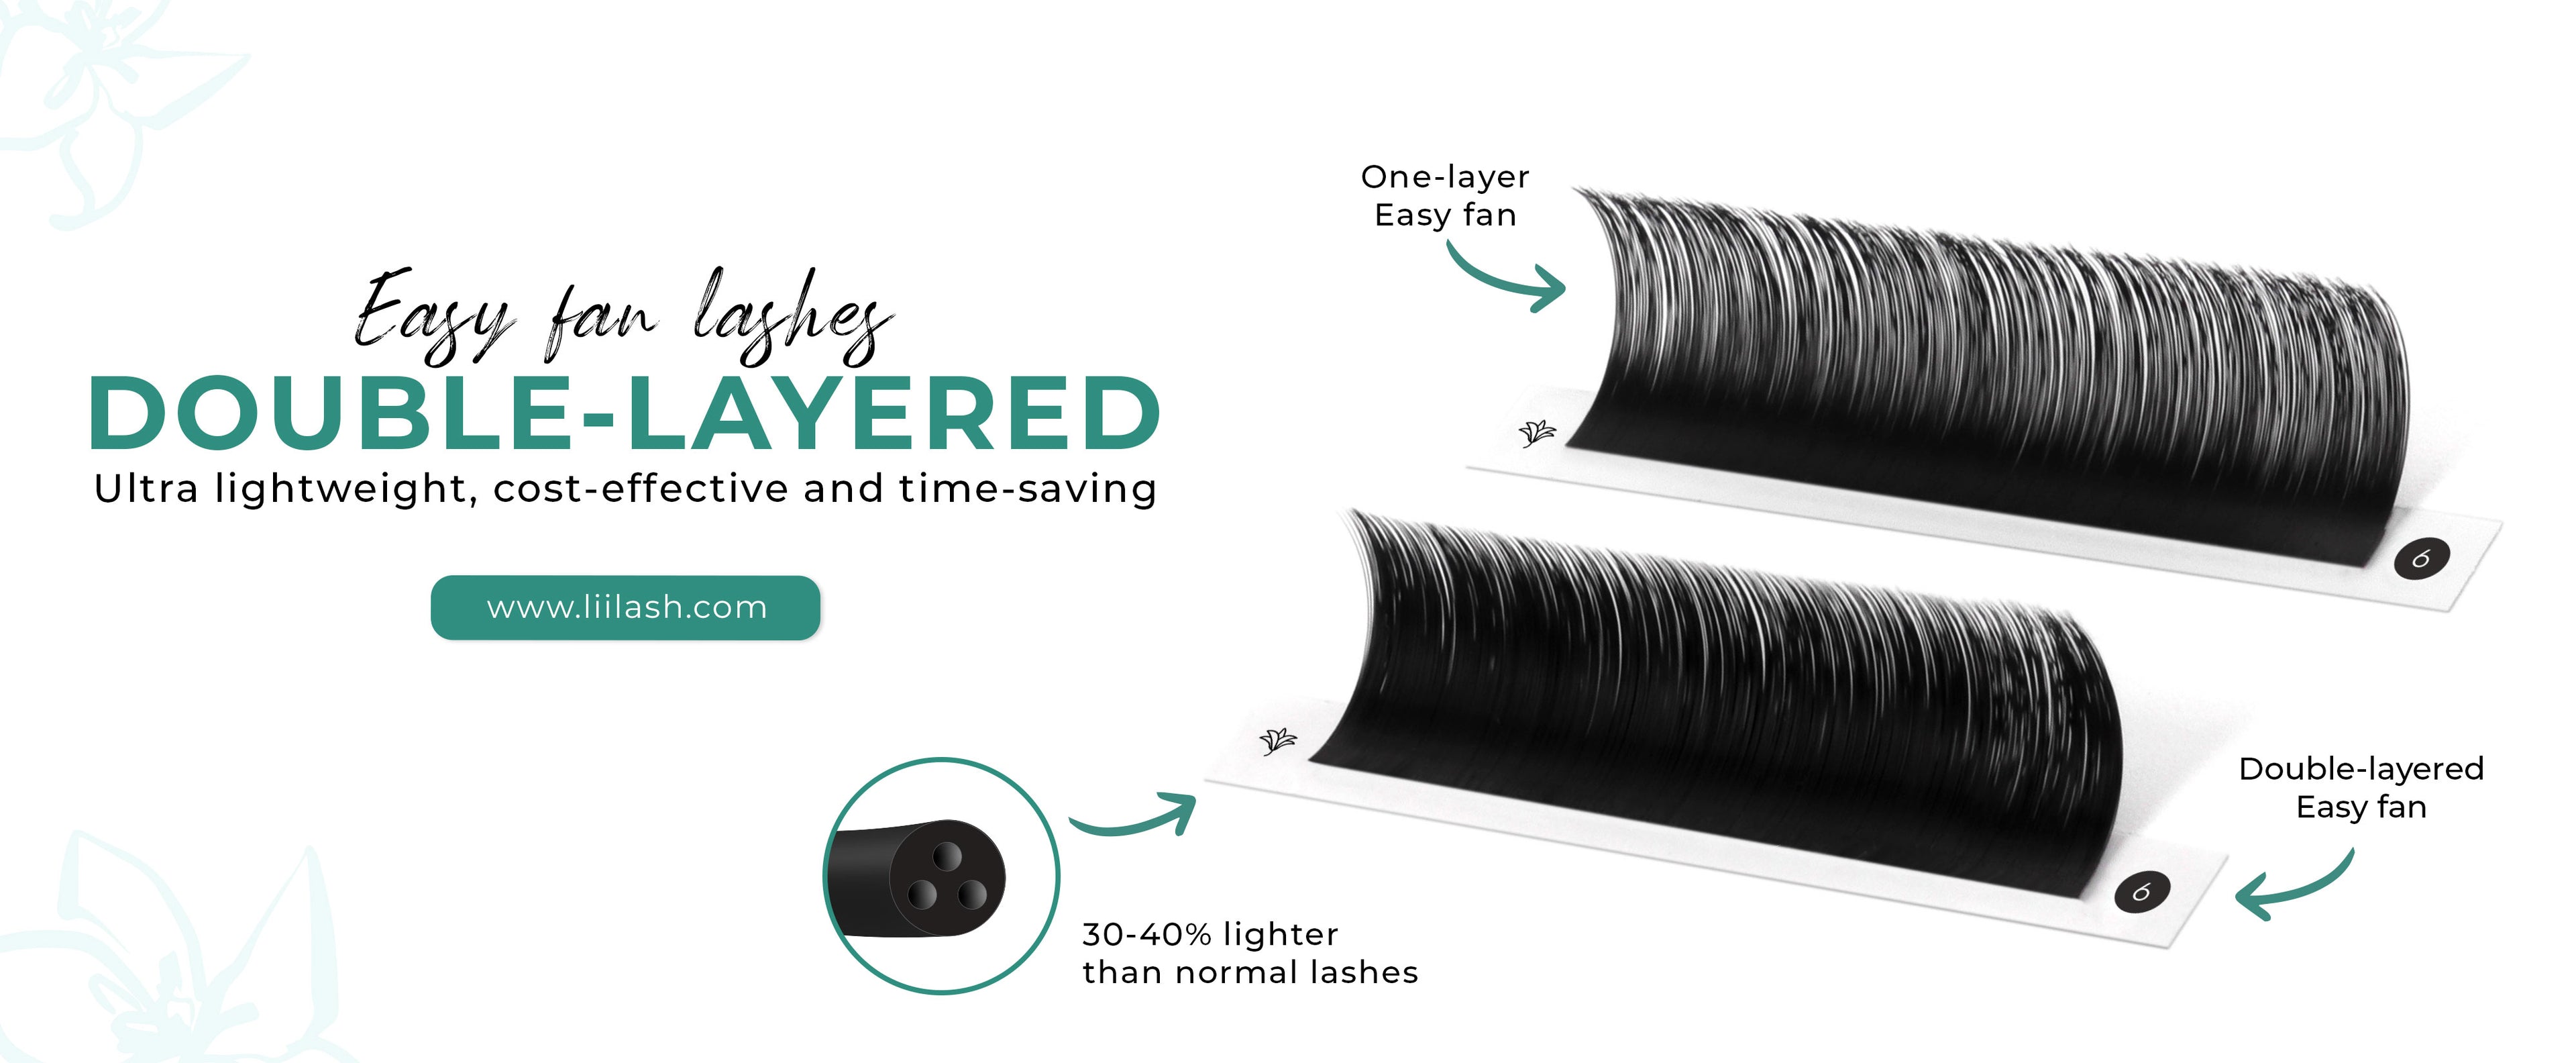 Double-layered easy fan lashes